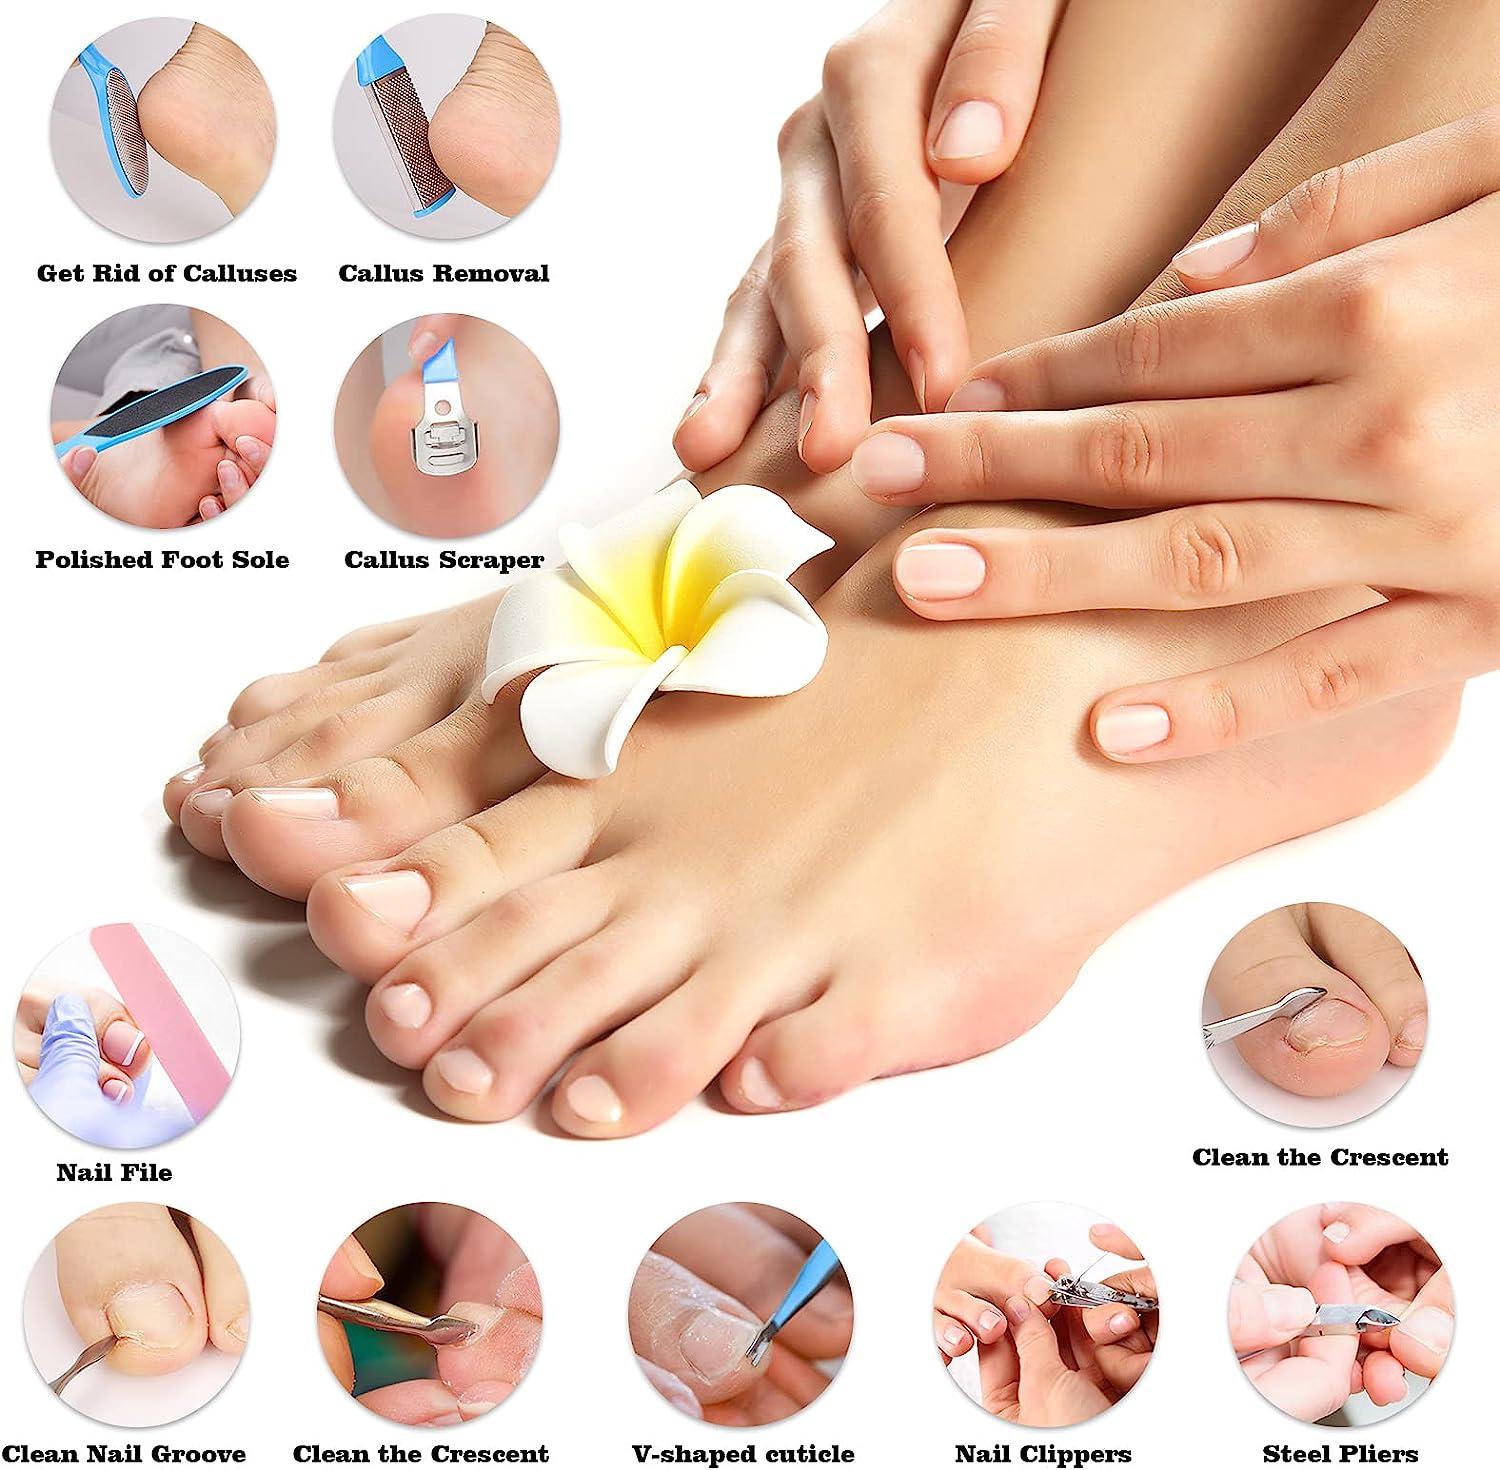 Up To 73% Off on 8PCS Pedicure Kit Rasp Foot F